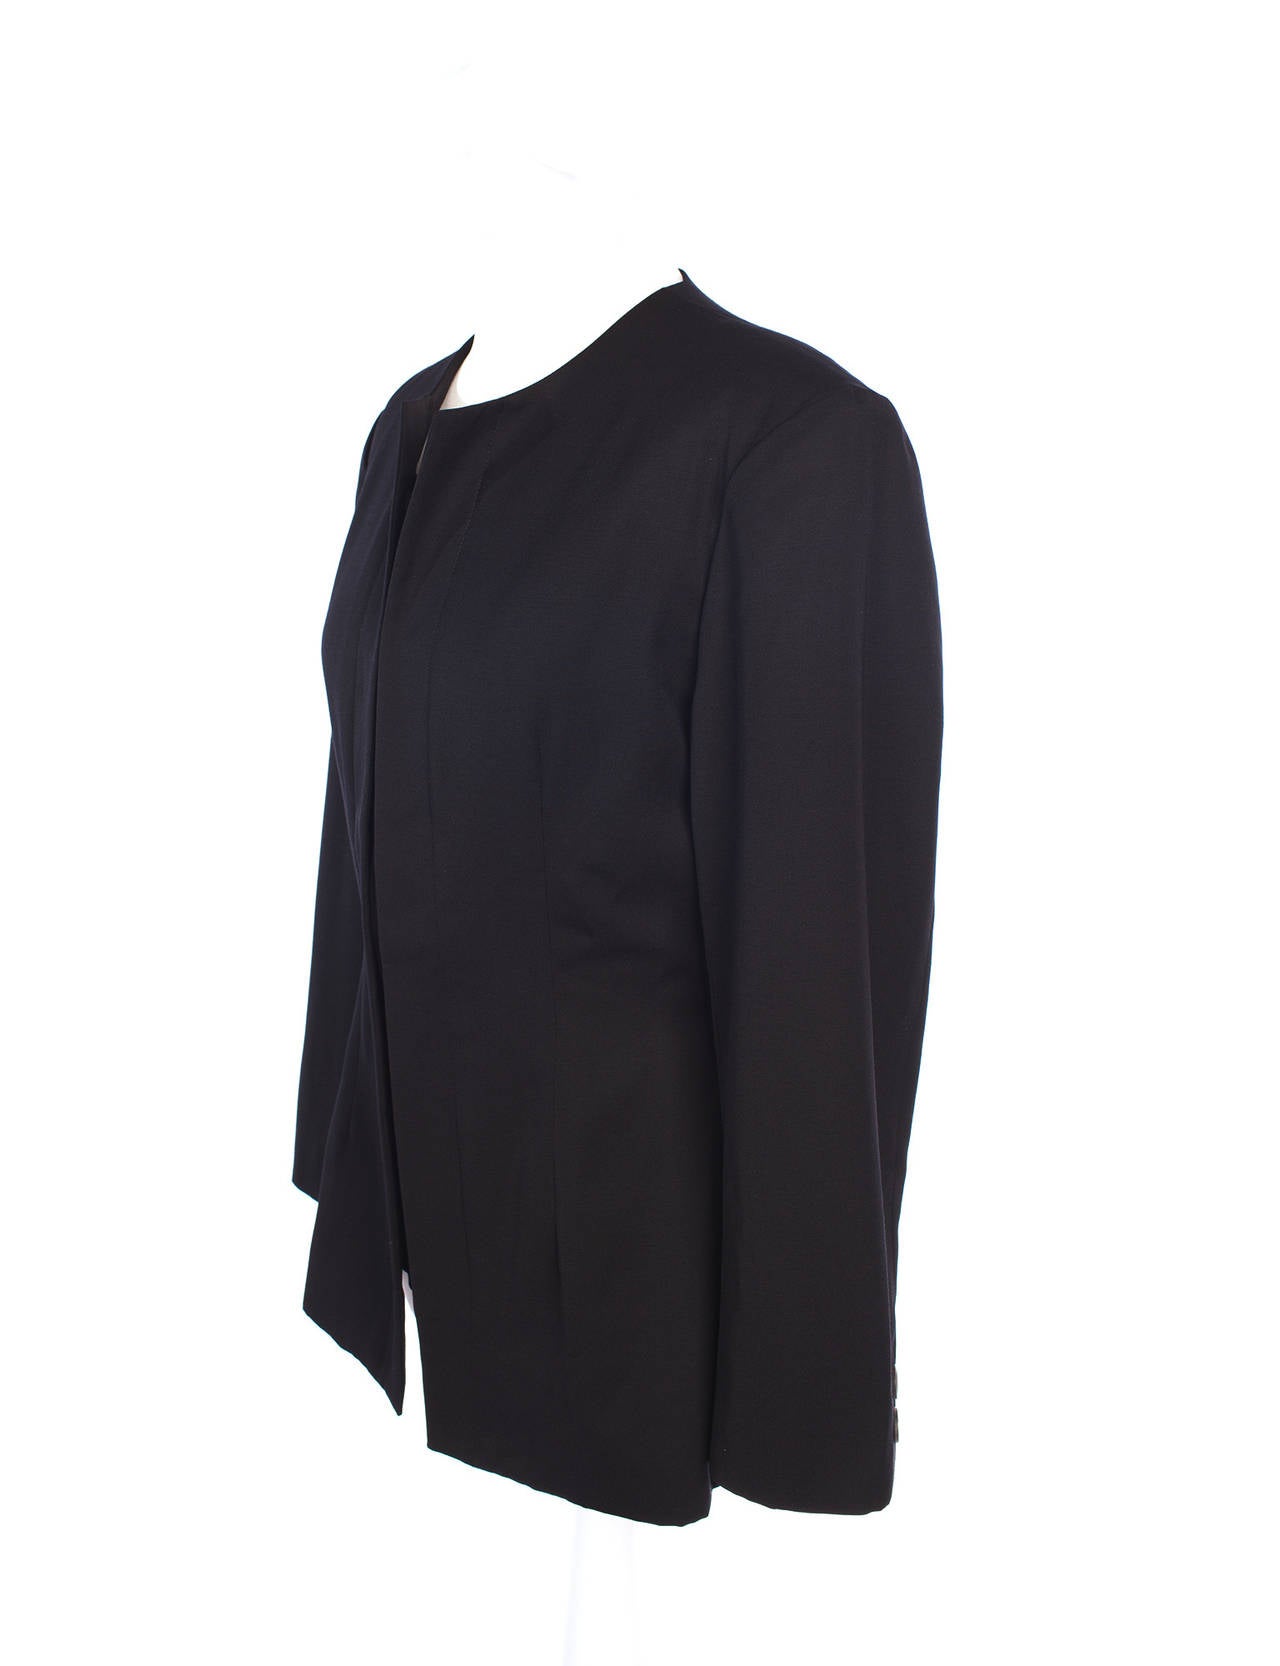 Yohji Yamamoto vintage 90's collarless black blazer. Blazer has double front placket, asymmetrical side button details, front and back darts, 6 buttons, fully lined.